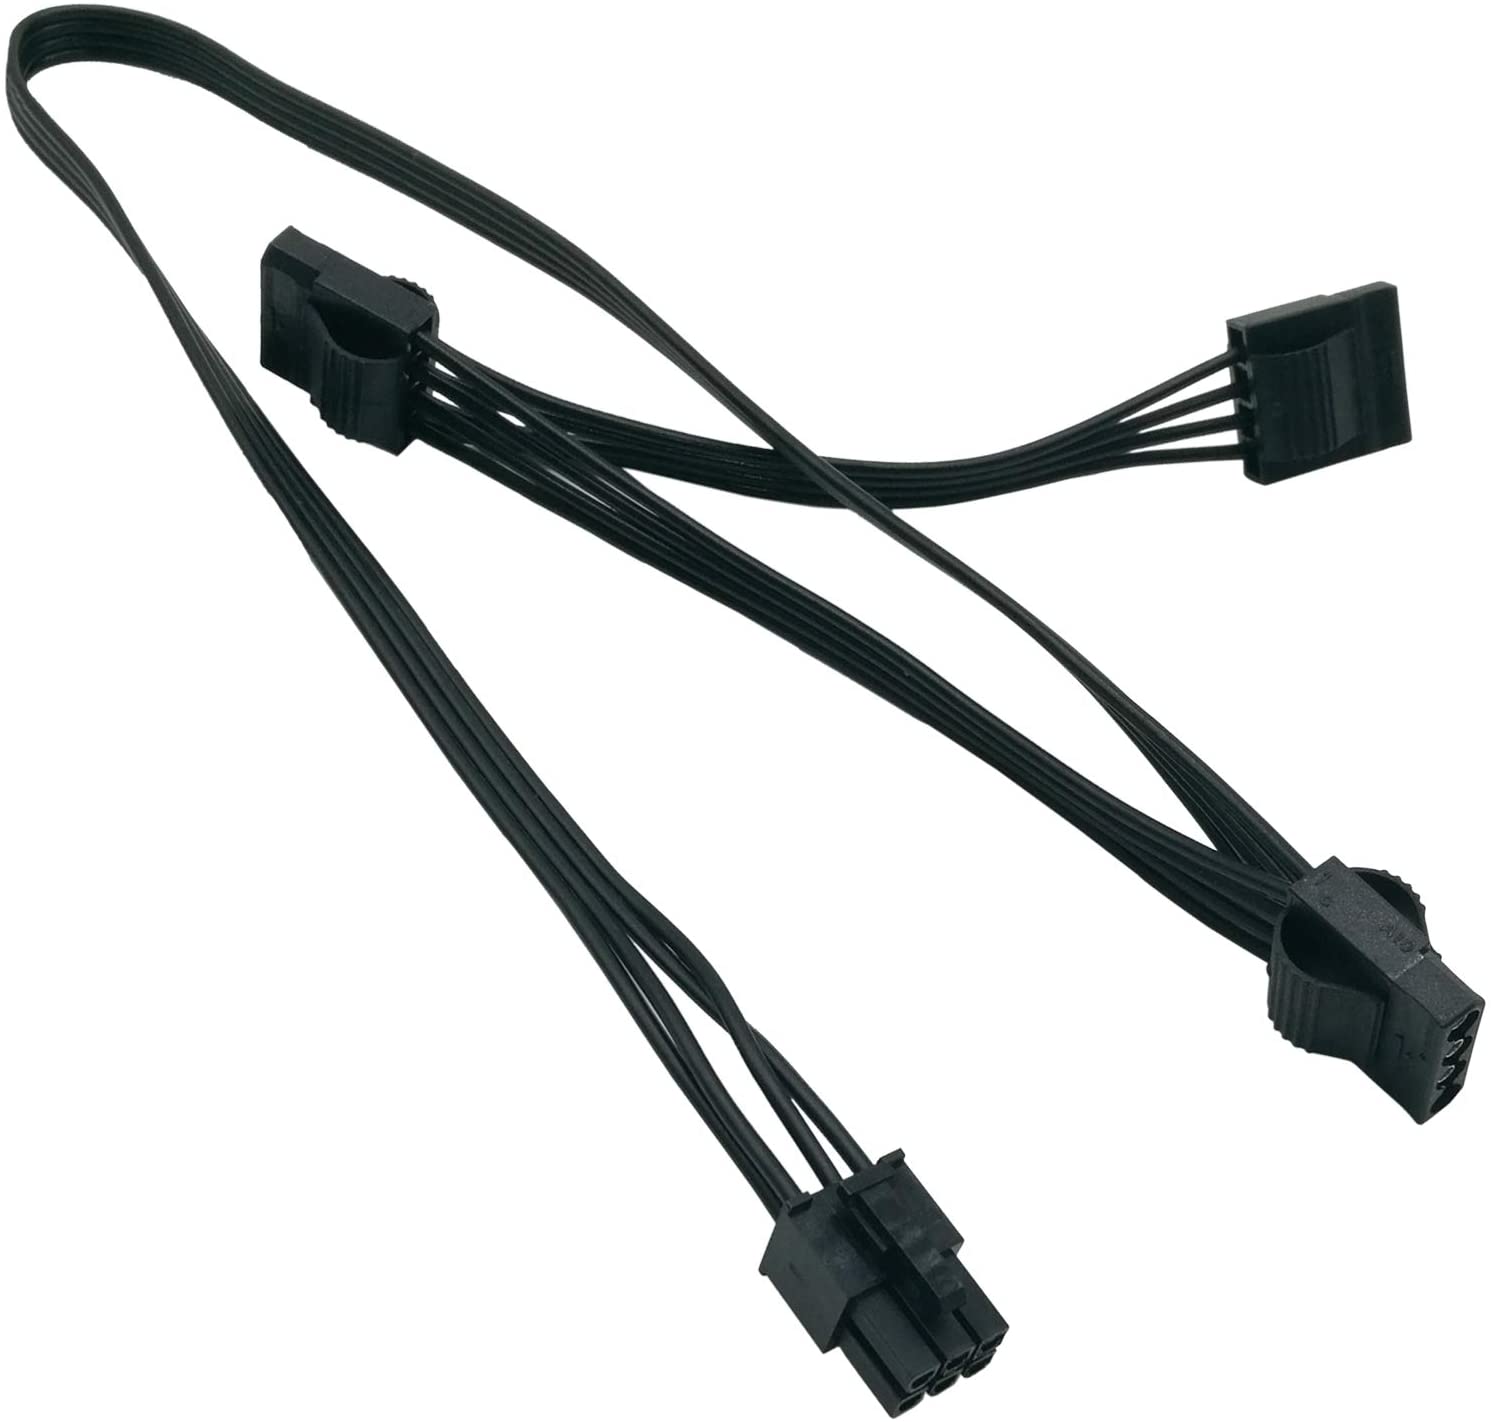 50cm COMeap 6 Pin to 3X 15 Pin SATA Hard Drive Power Adapter Cable for Some Types of Corsair Modular PSUs 20-in